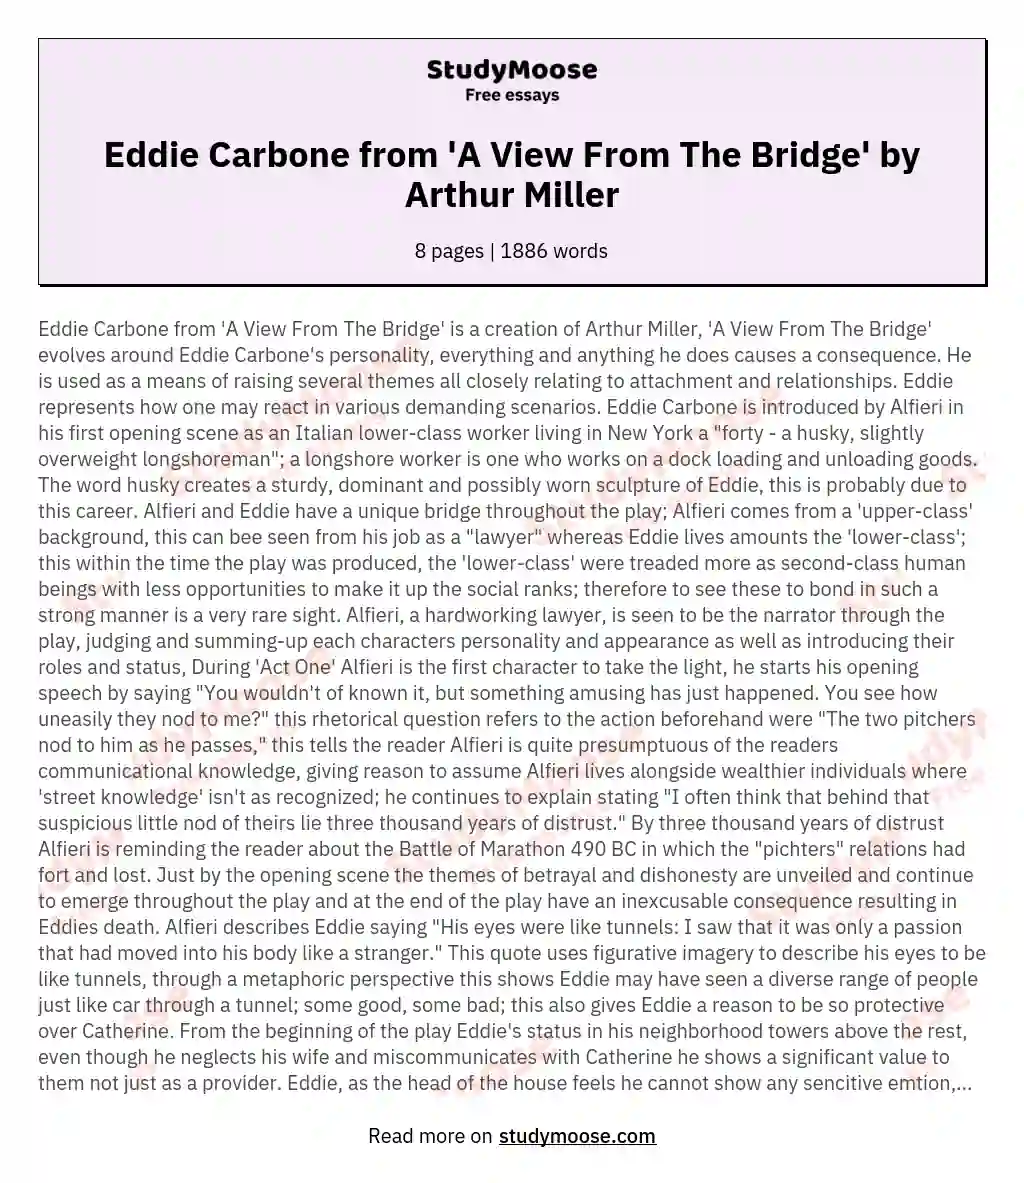 Eddie Carbone from 'A View From The Bridge' by Arthur Miller